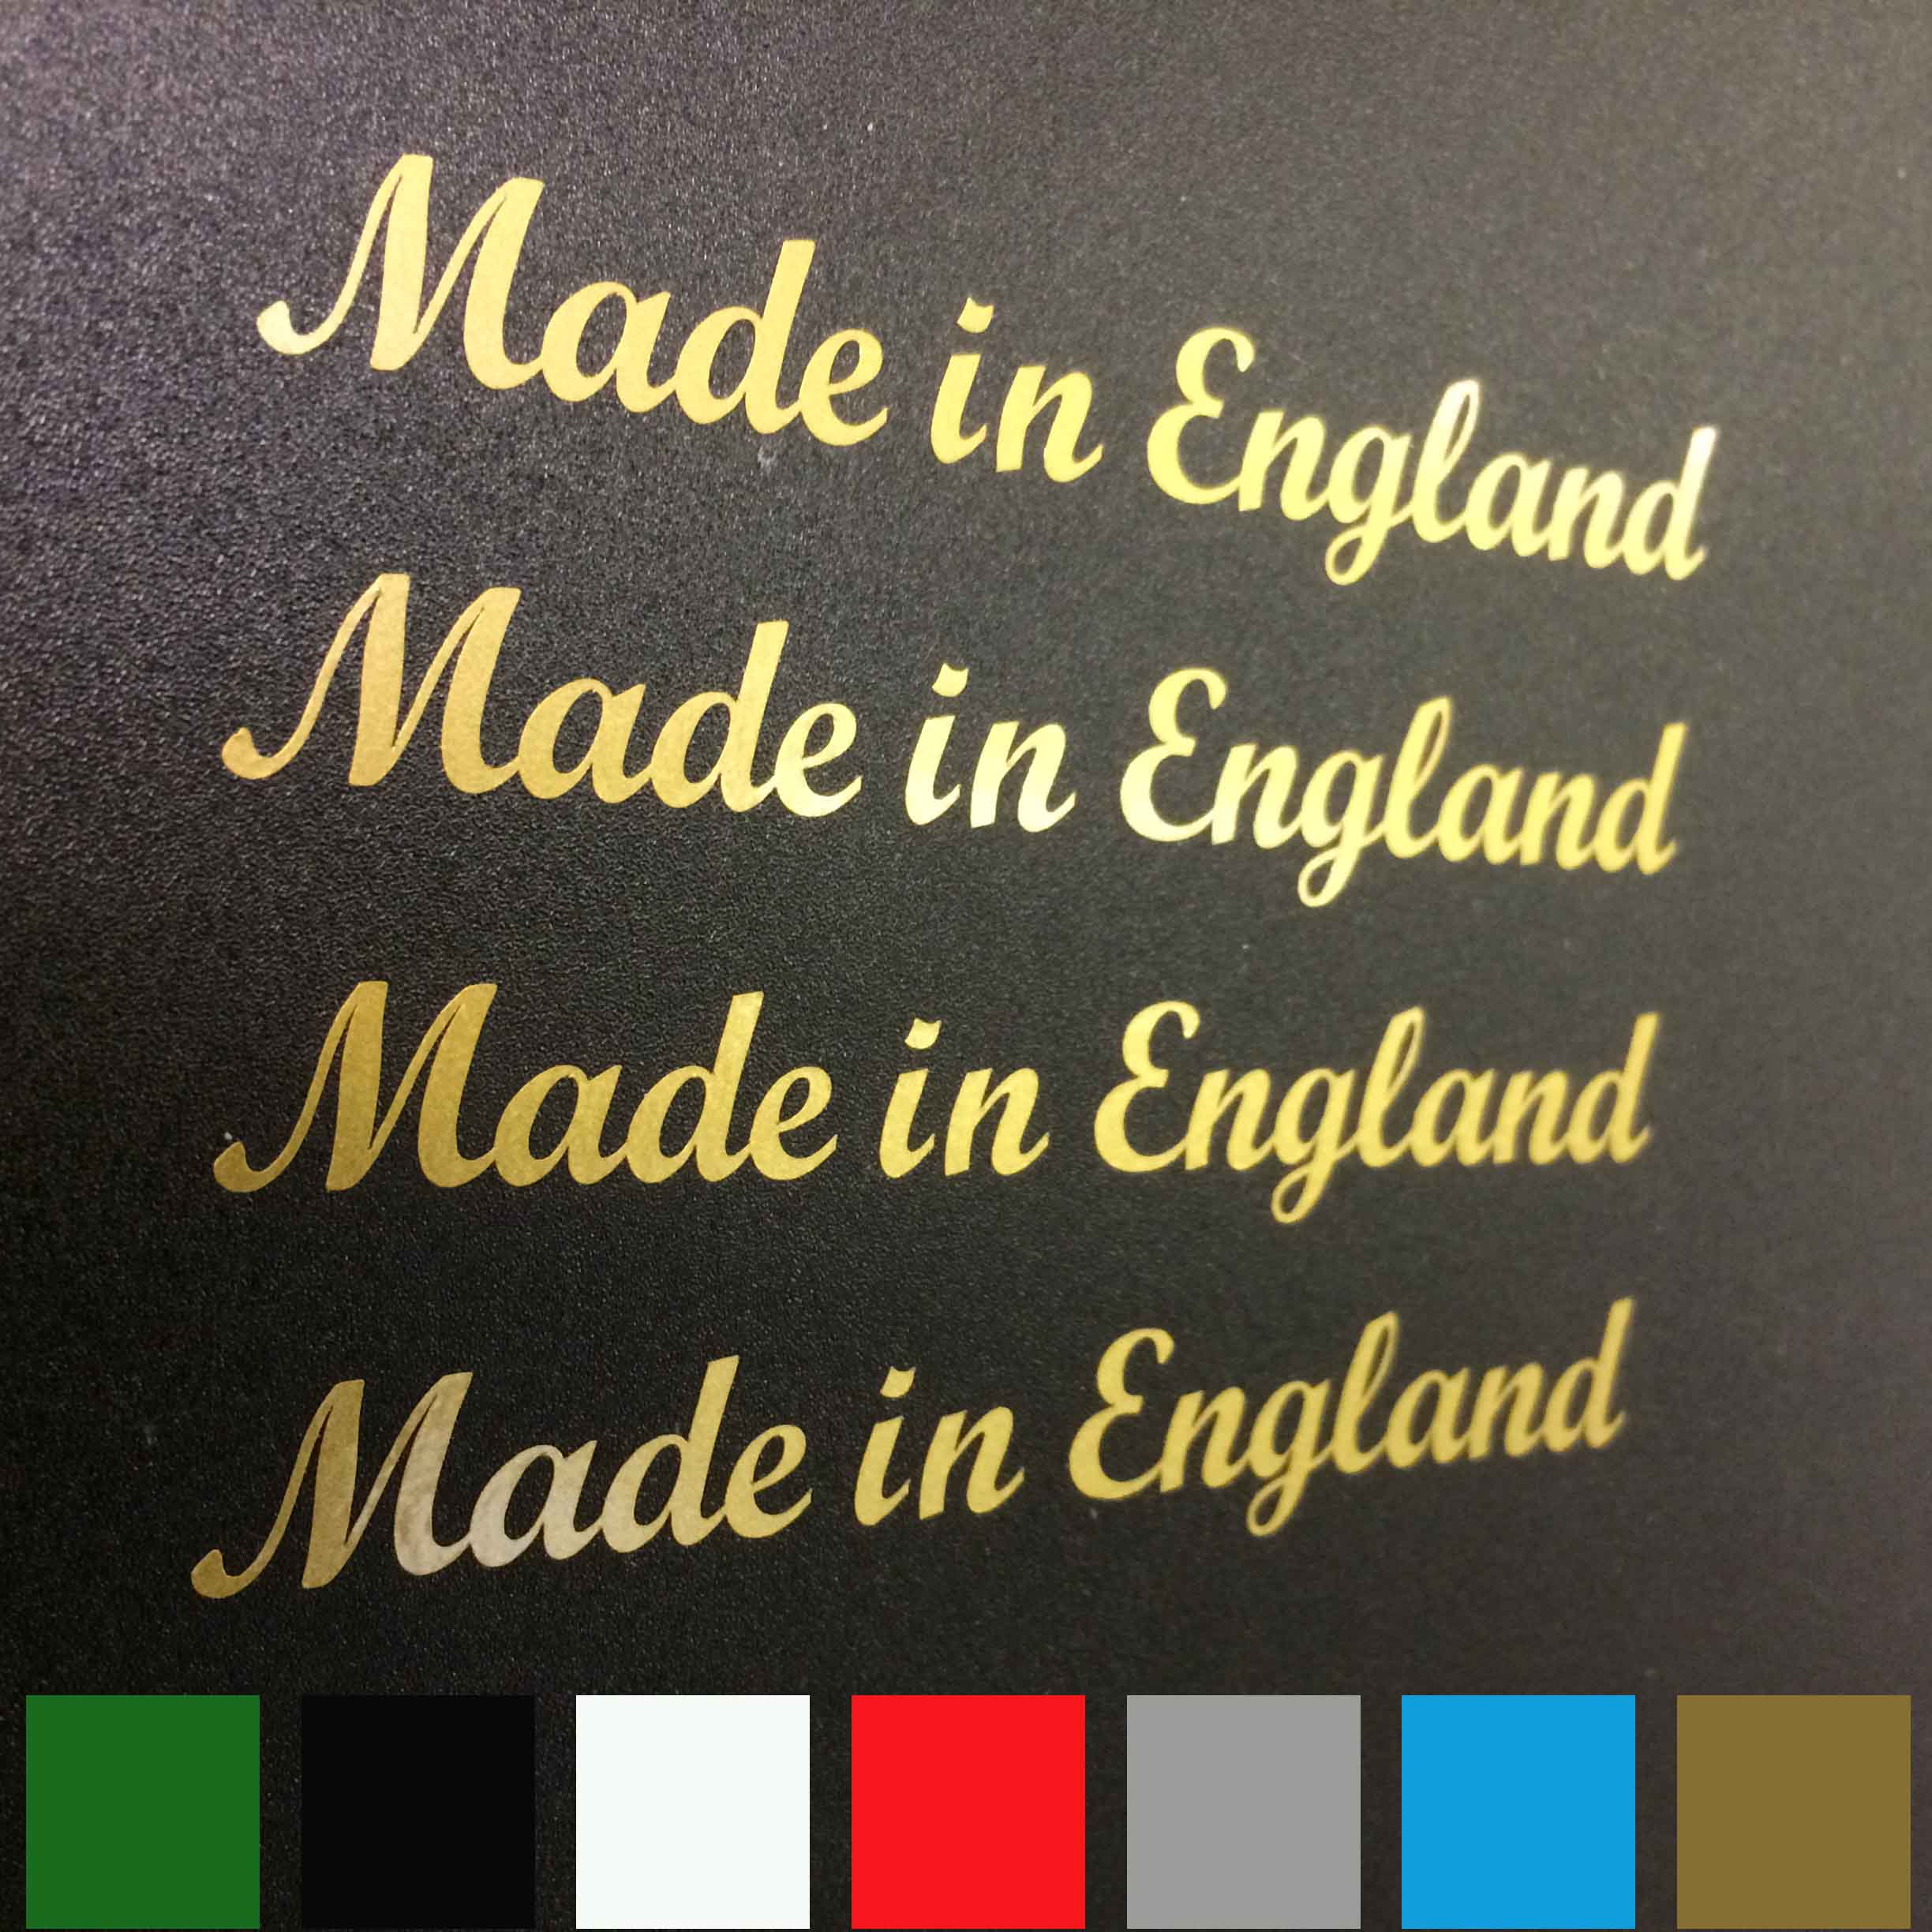 Made In England in lowercase italic lettering.